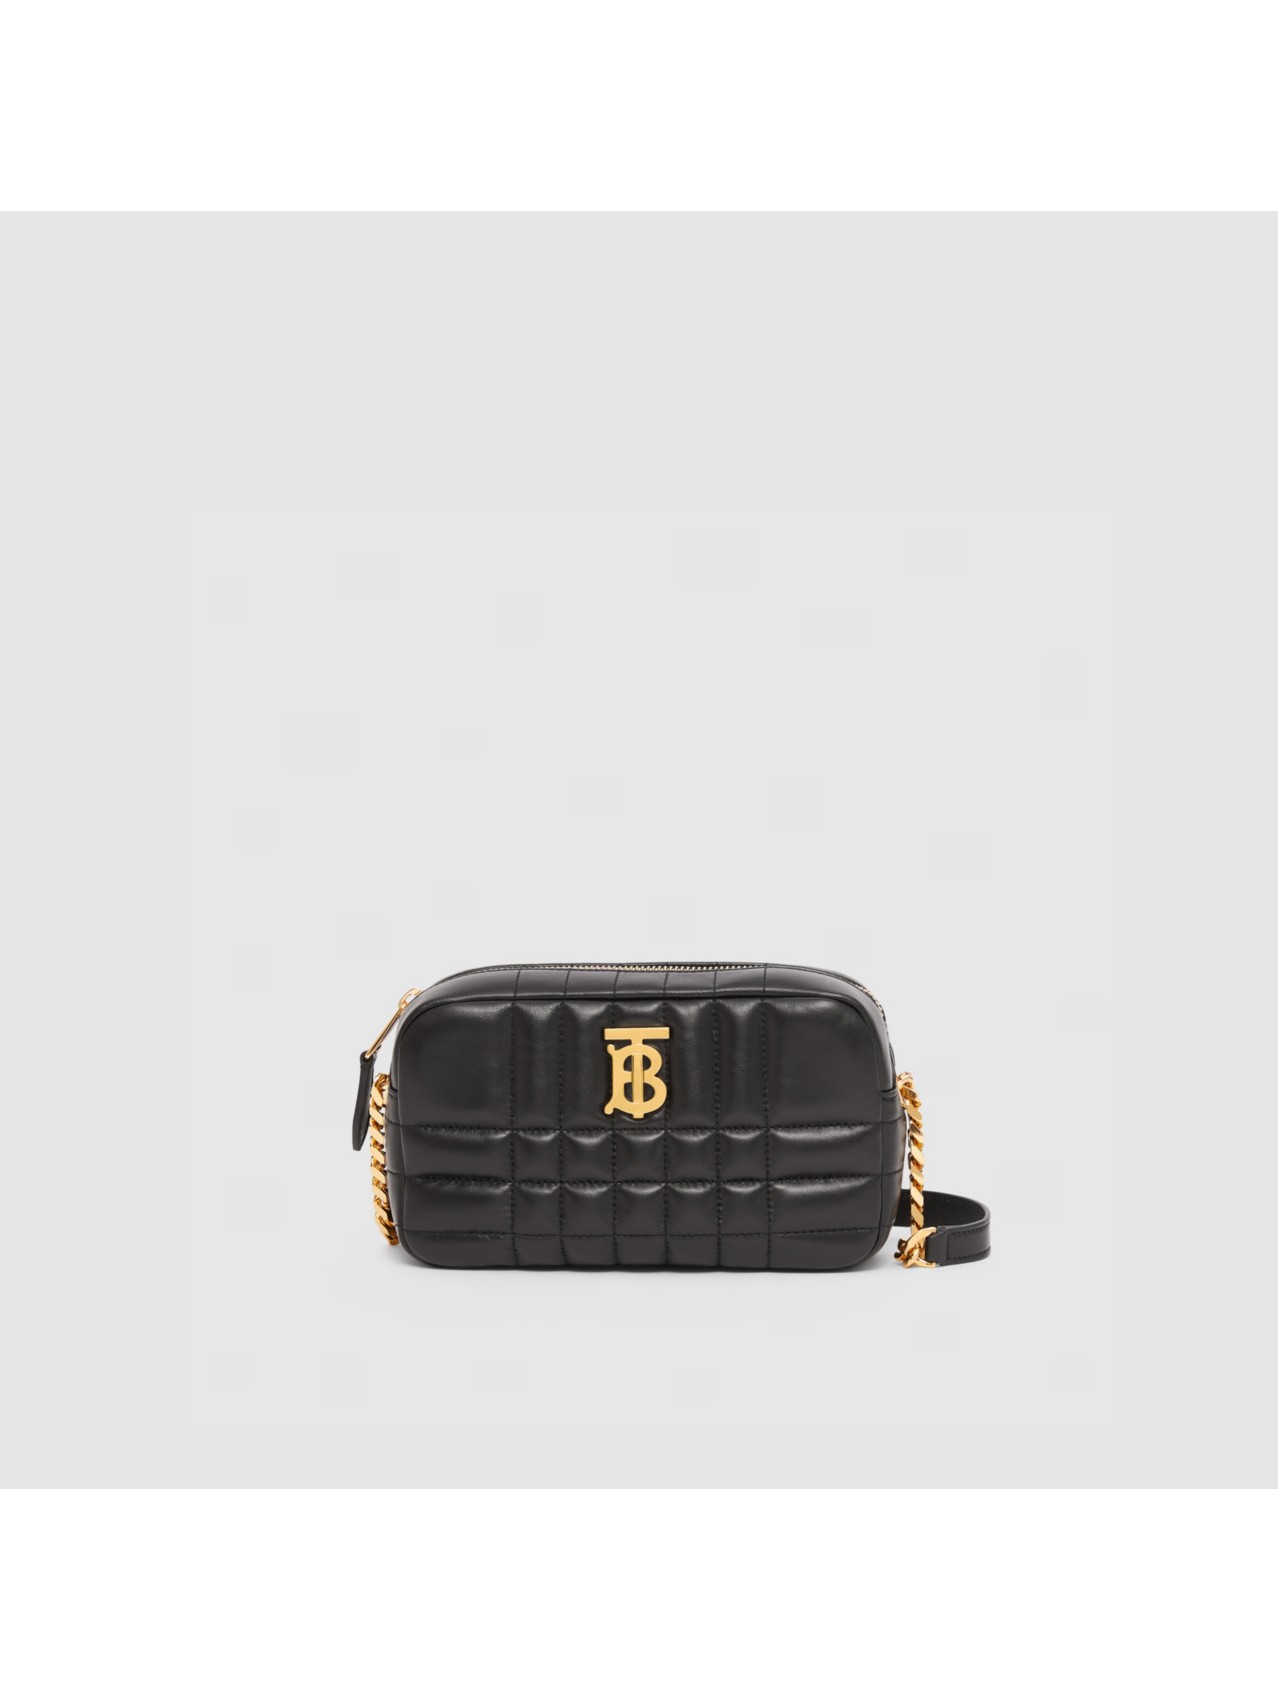 Women’s Bags | Check & Leather Bags for Women | Burberry® Official